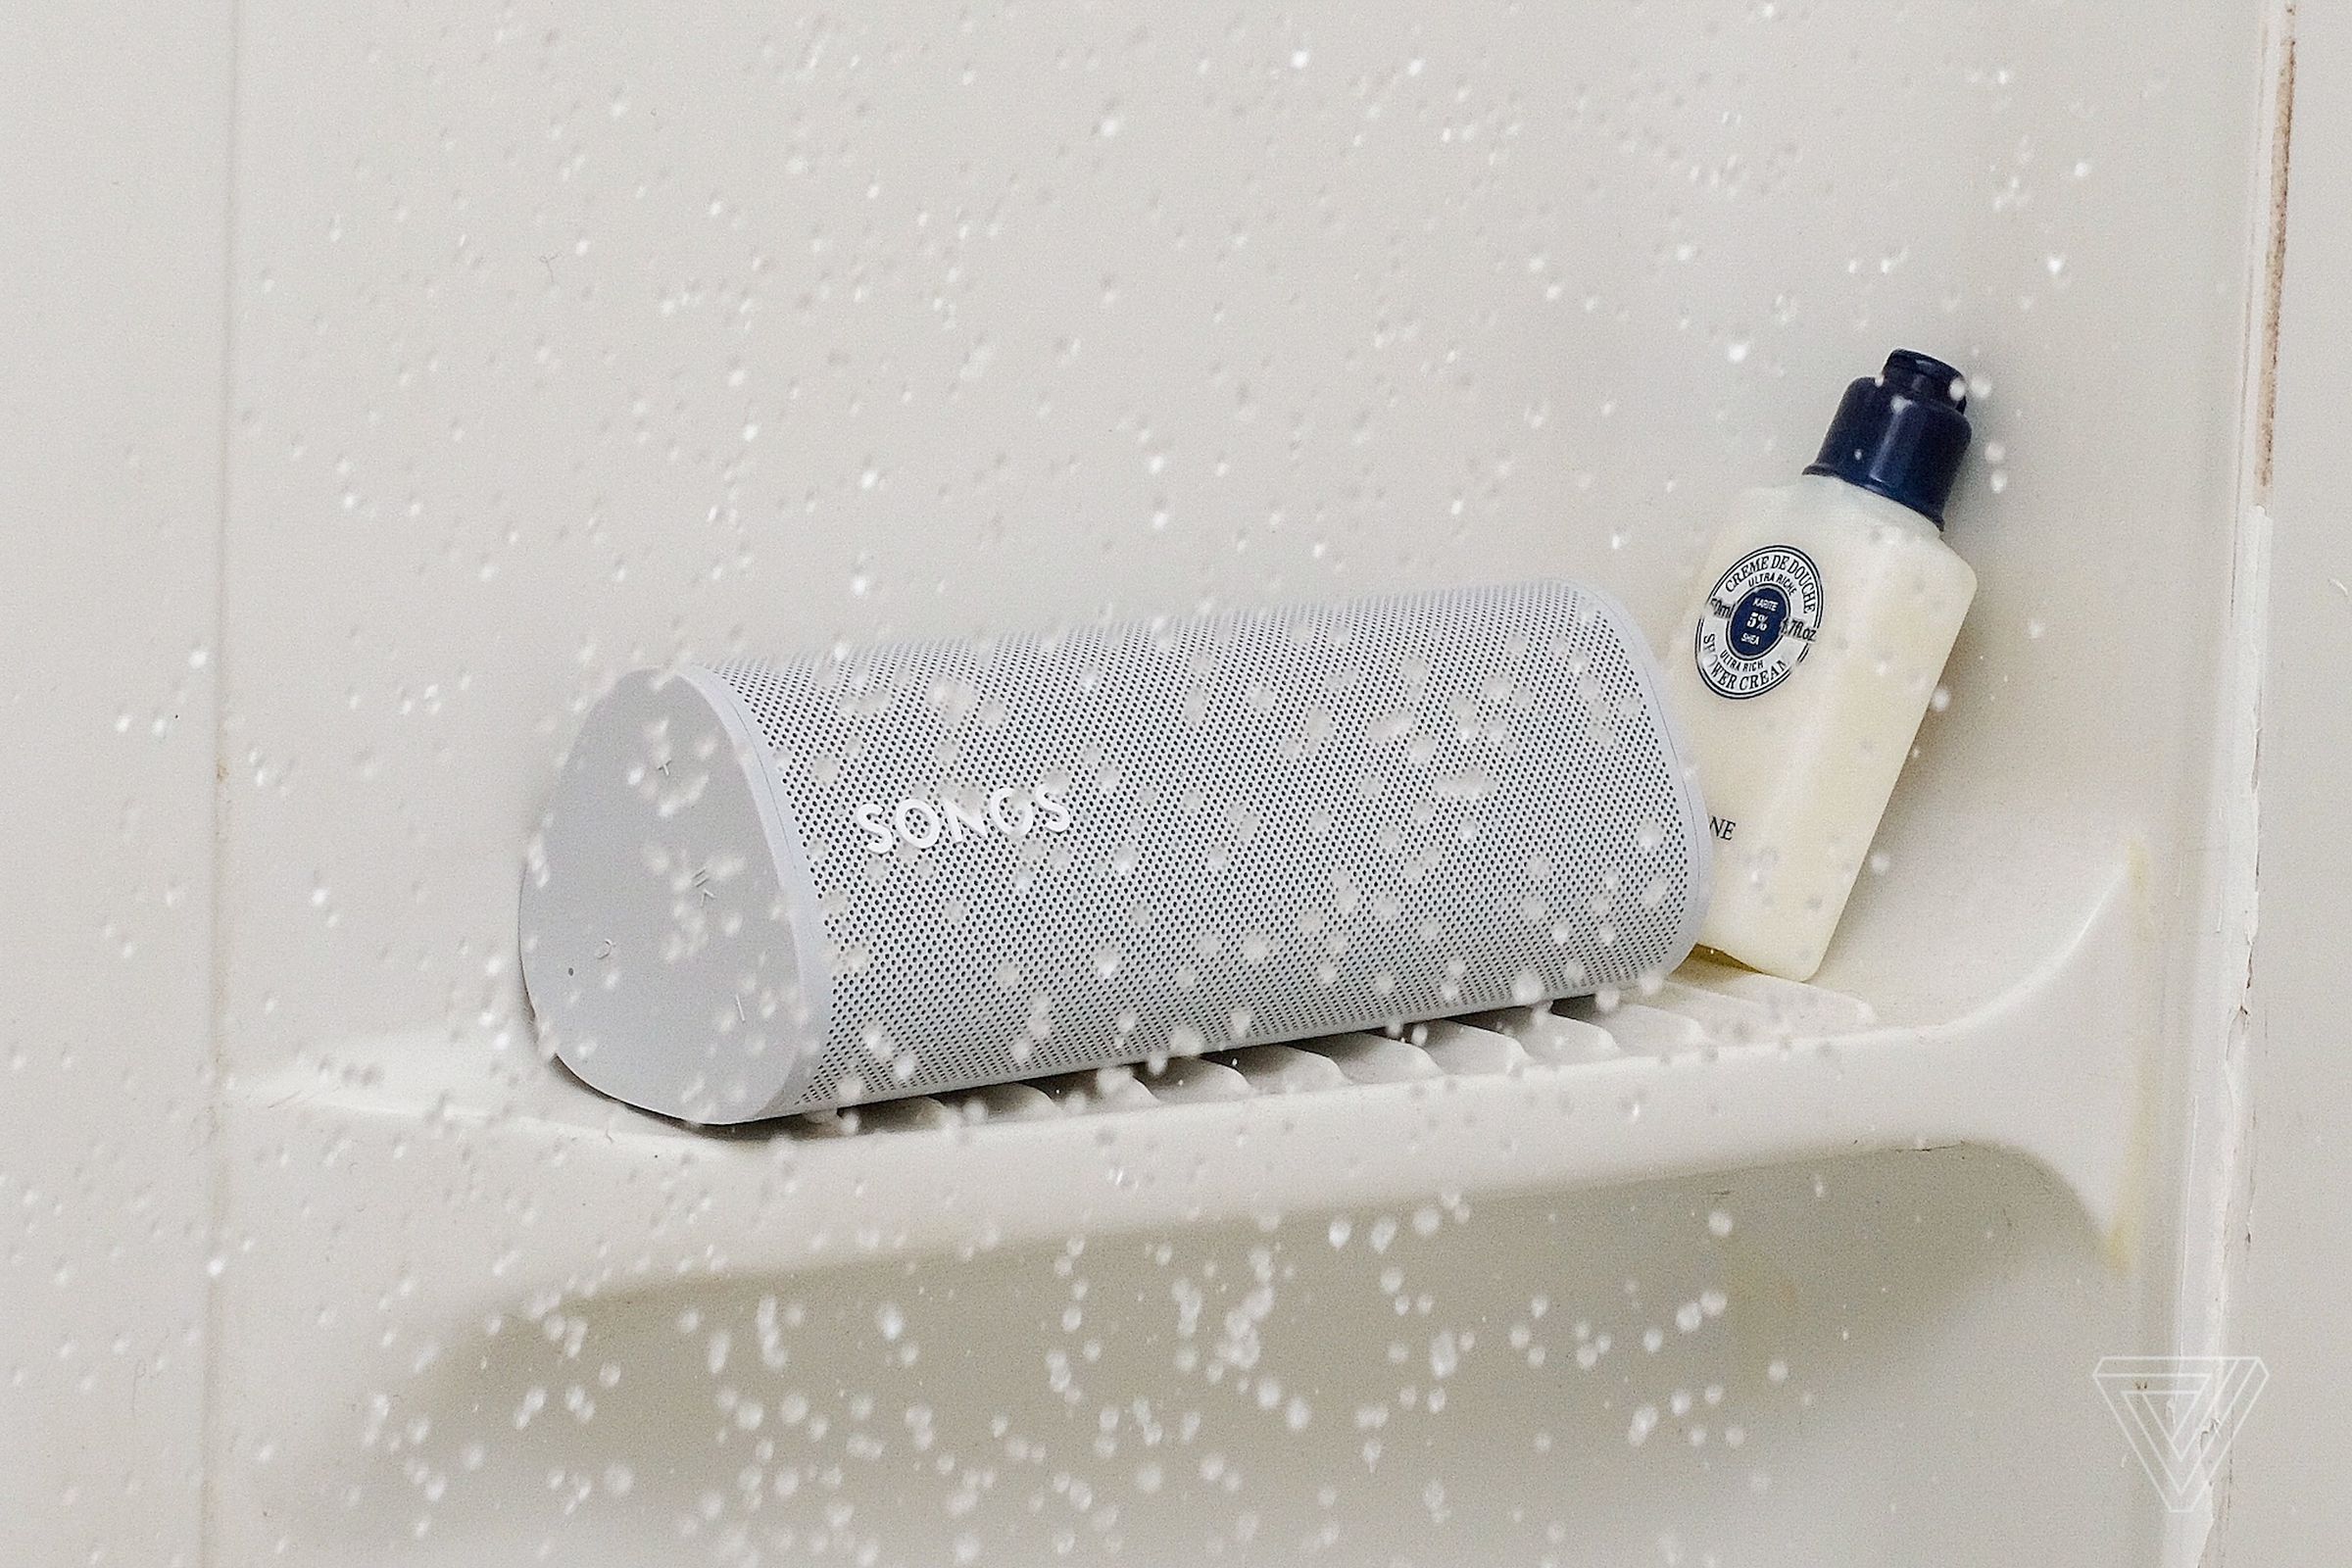 Want to hear your TV’s audio in the shower? Here’s how.